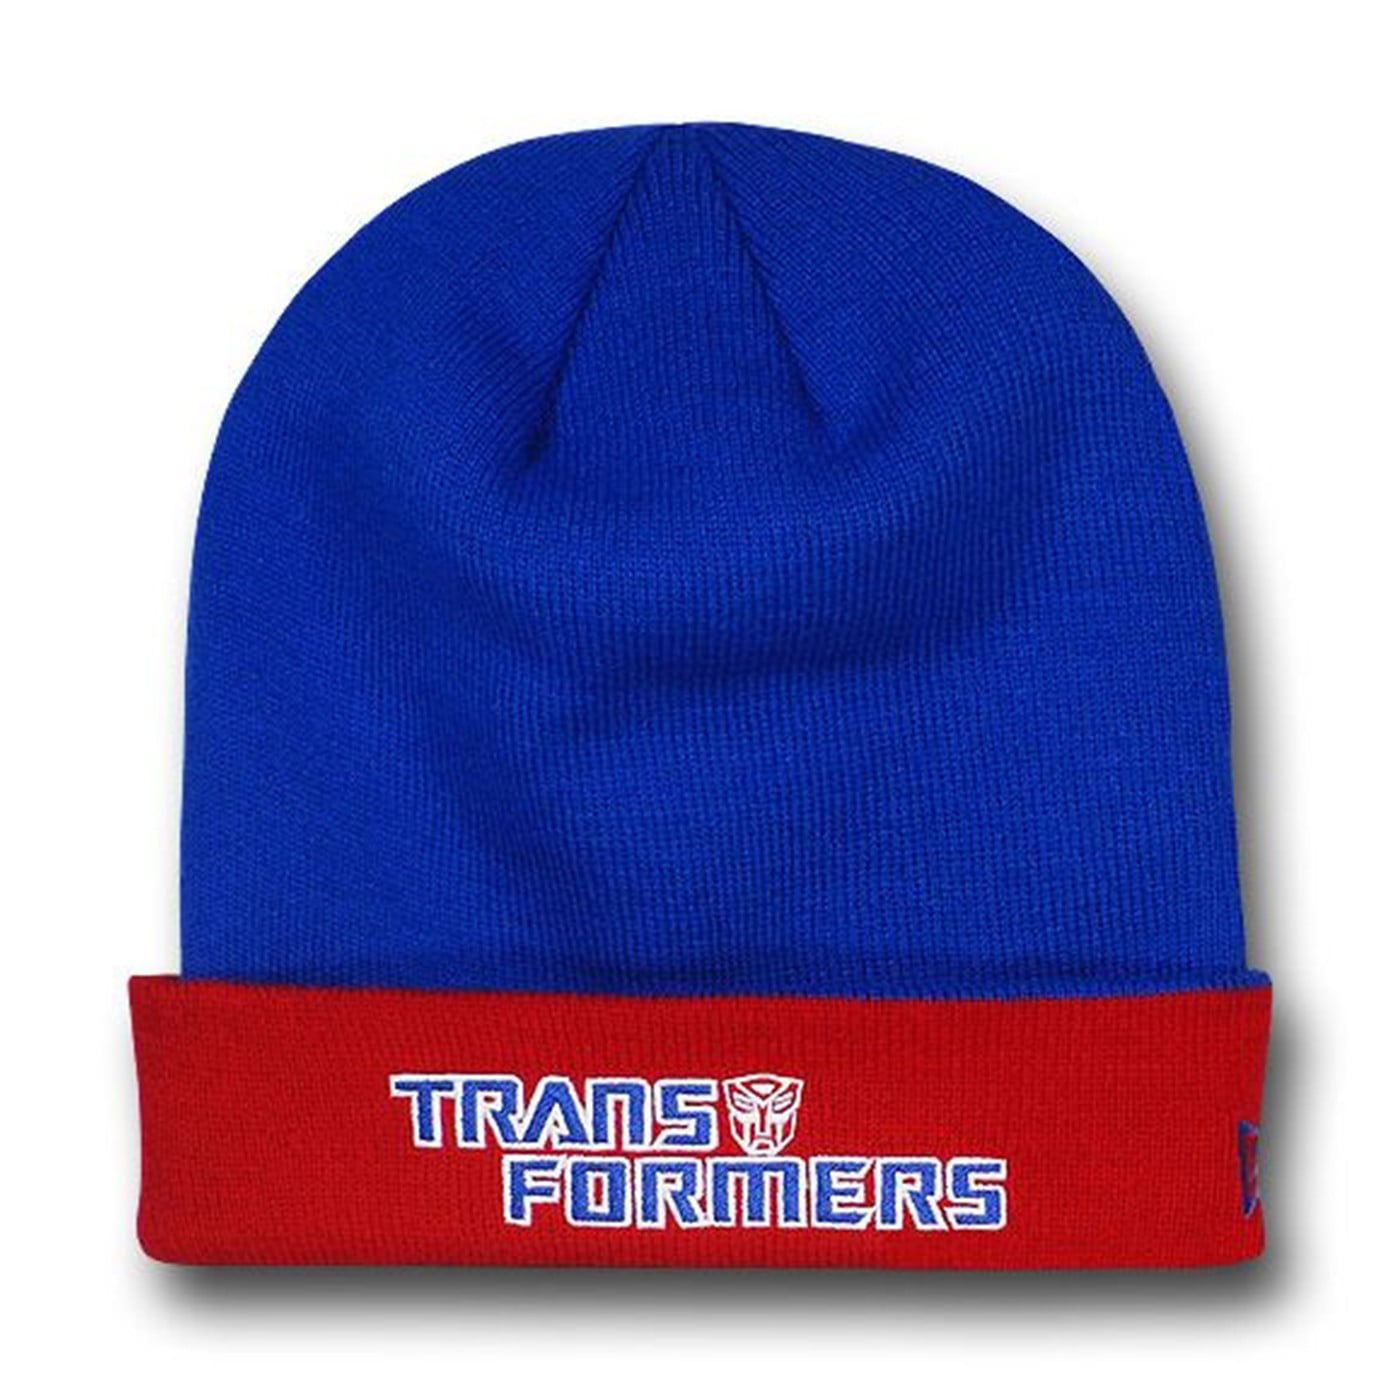 Officially Licensed Transformers Autobot Beanie 